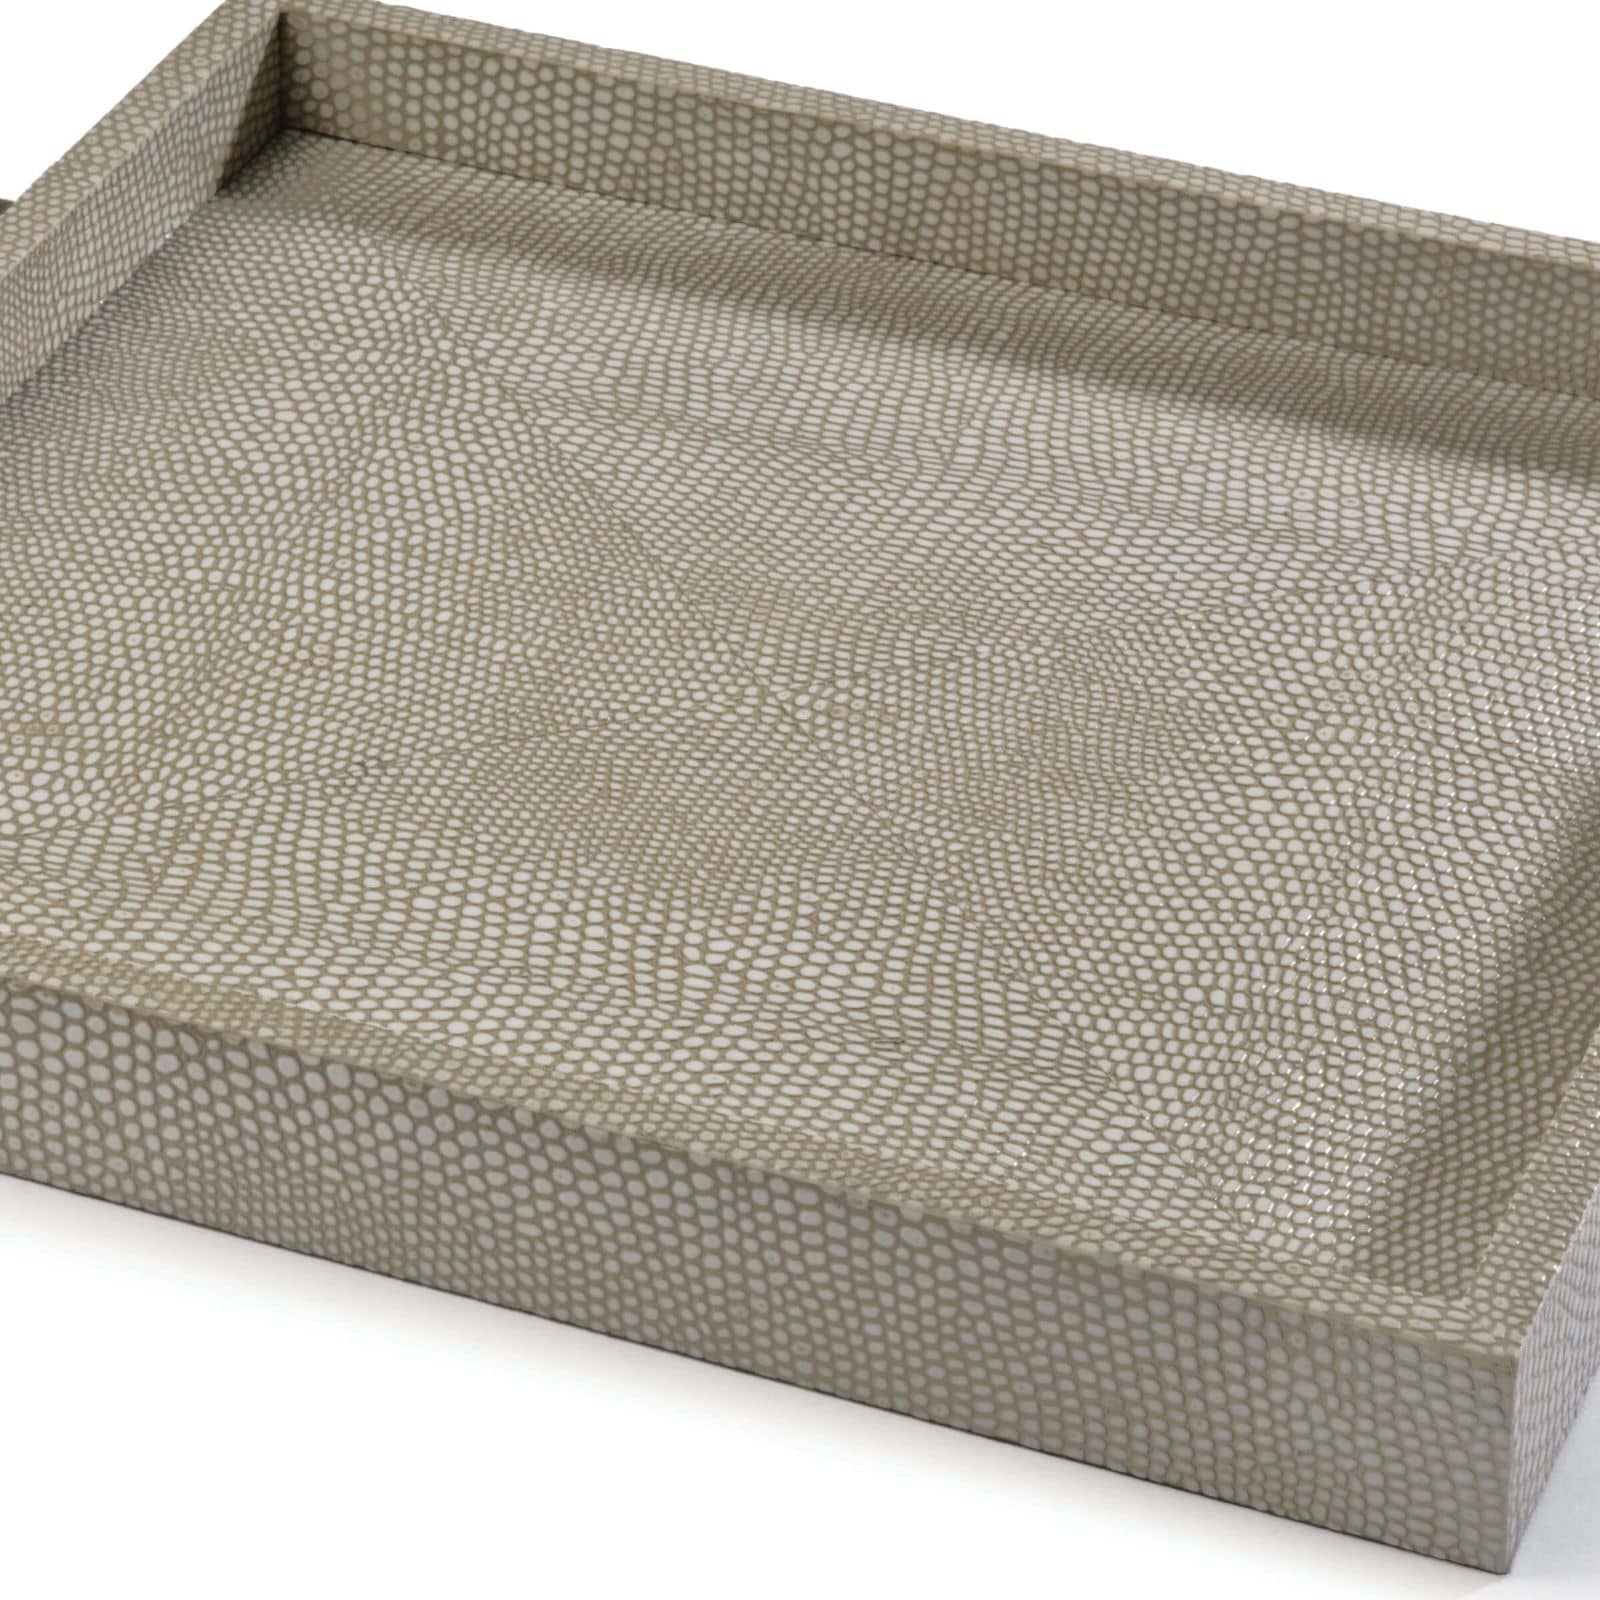 Square Shagreen Boutique Tray in Ivory Grey Python by Regina Andrew